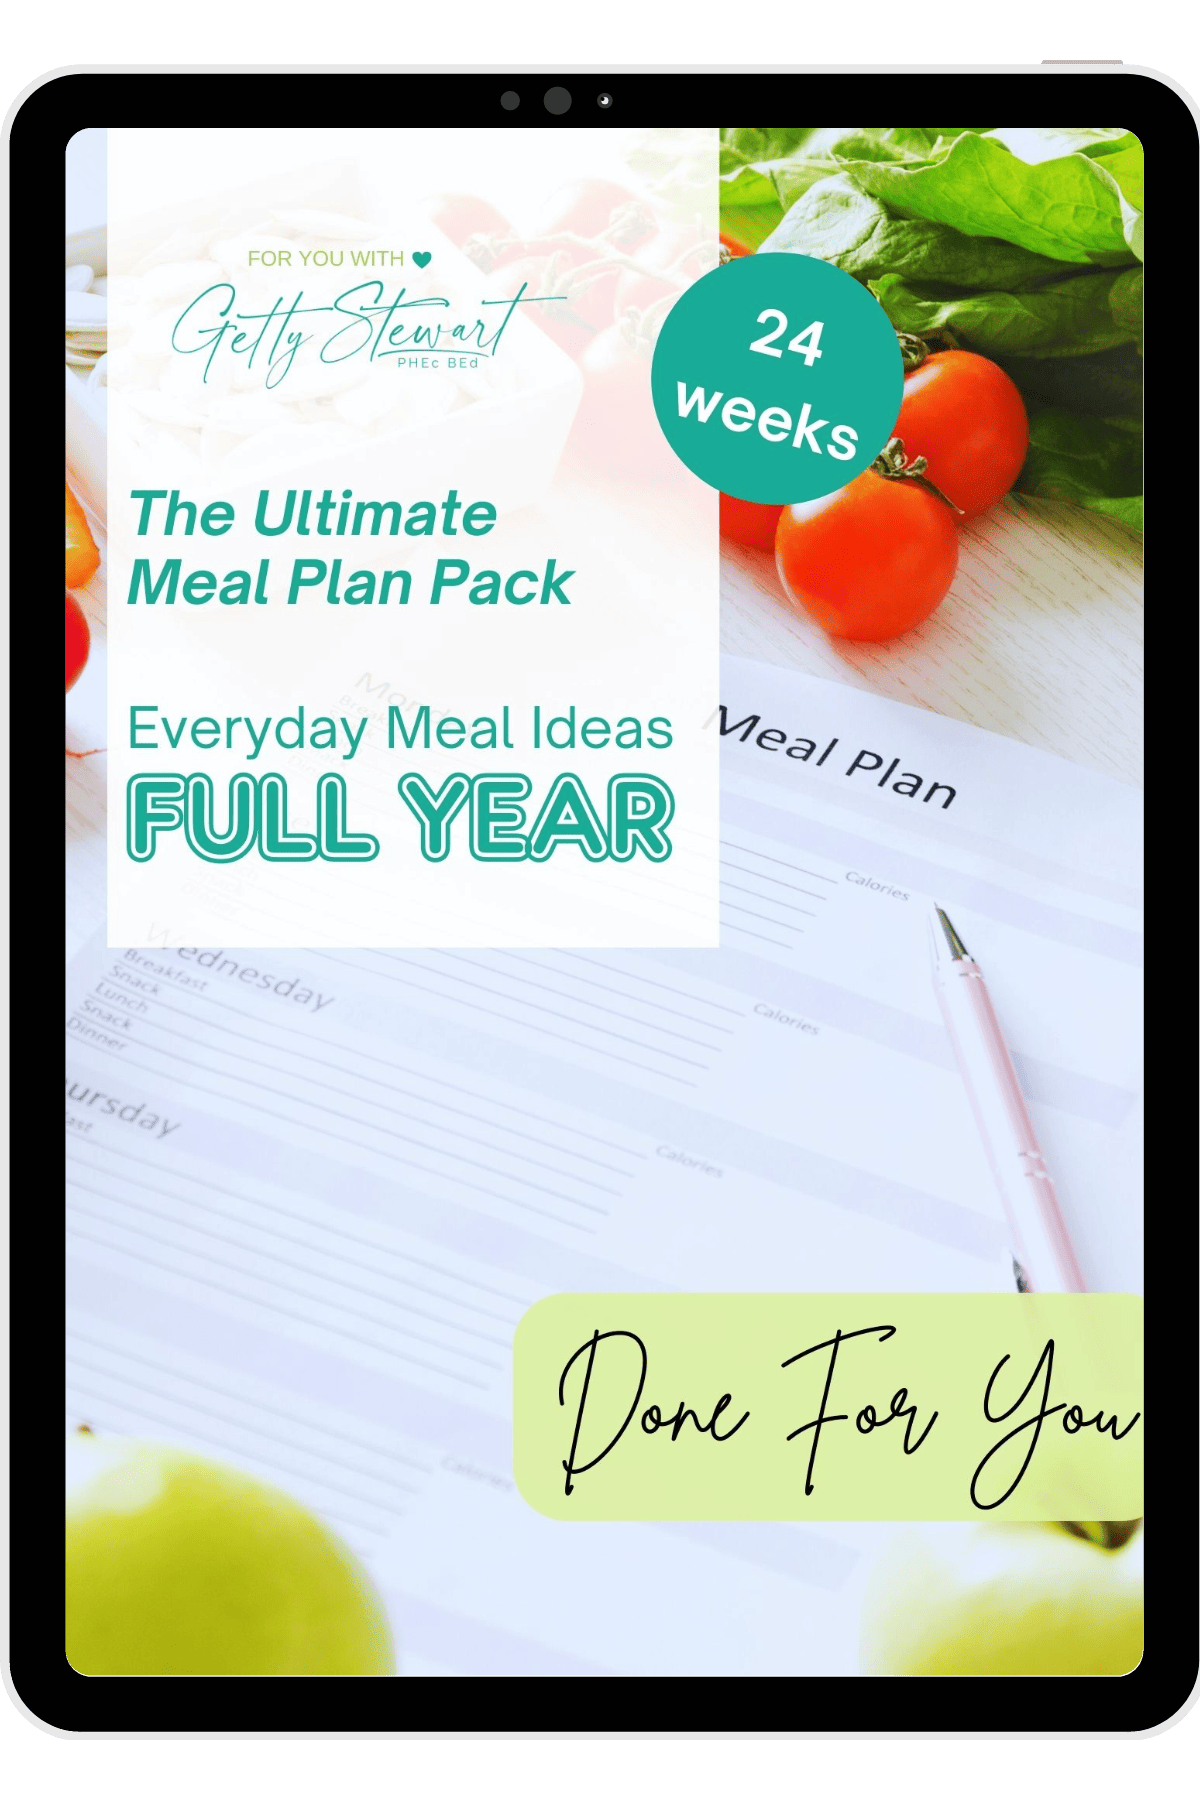 The Ultimate Meal Plan Pack – FULL YEAR